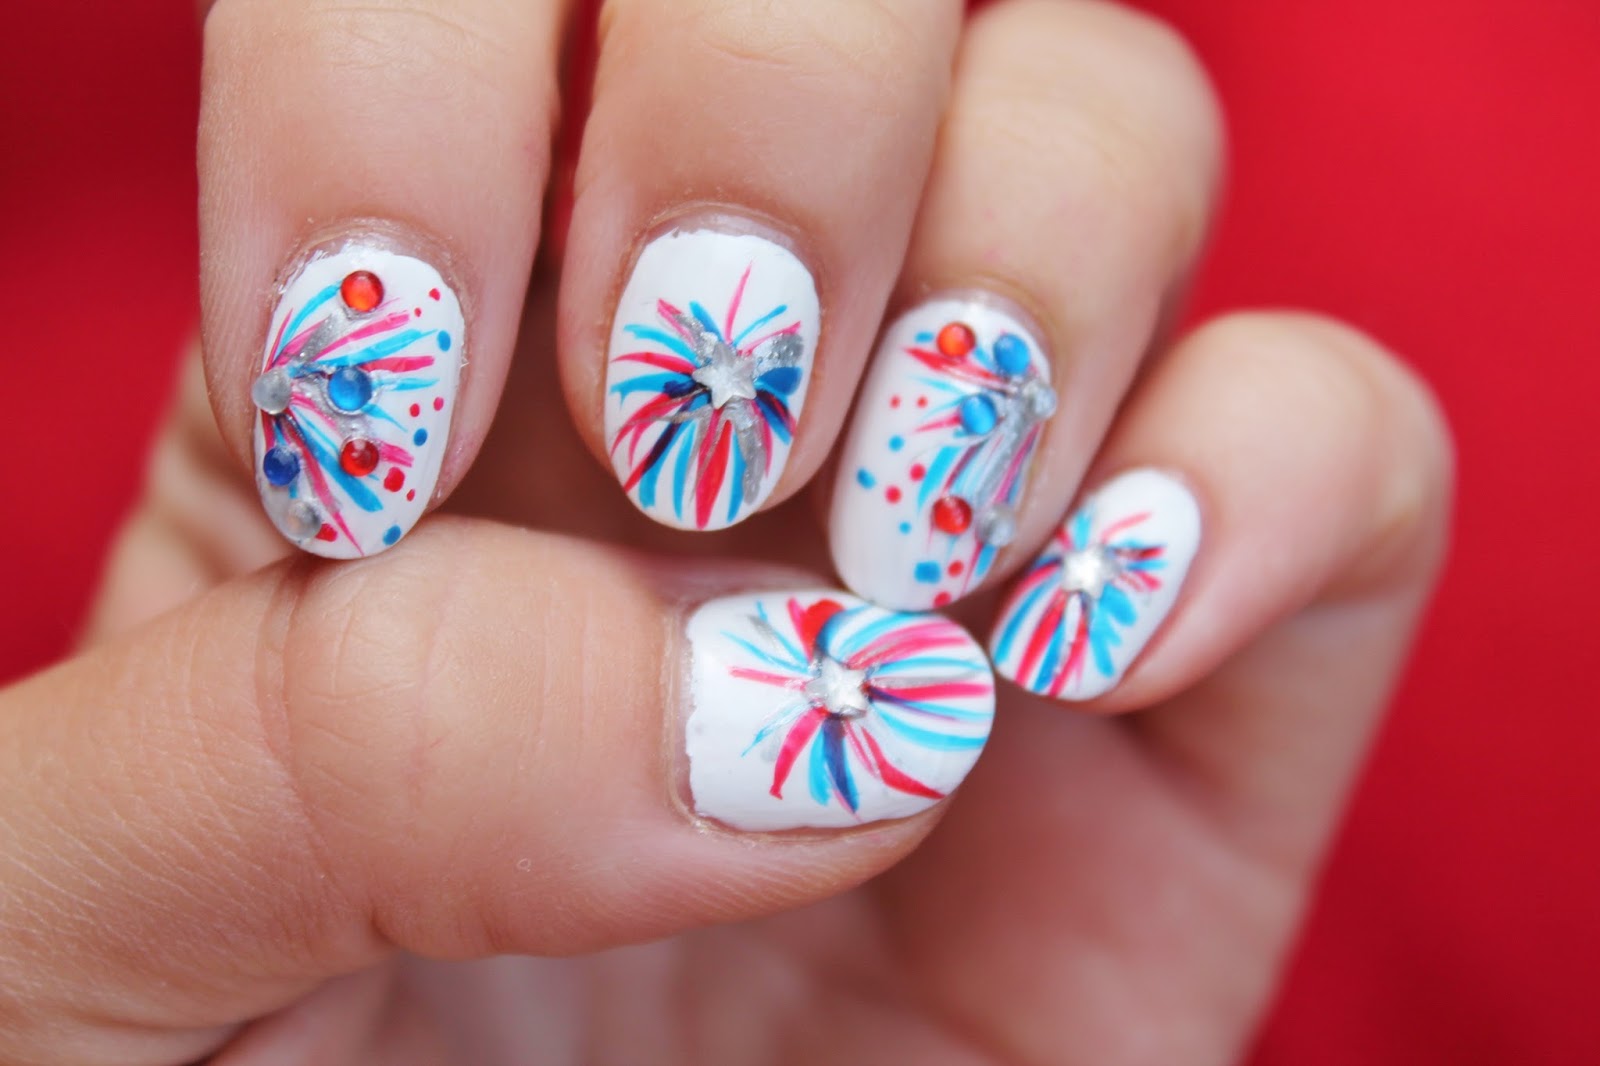 1. Patriotic Nail Art Designs for National Day - wide 6